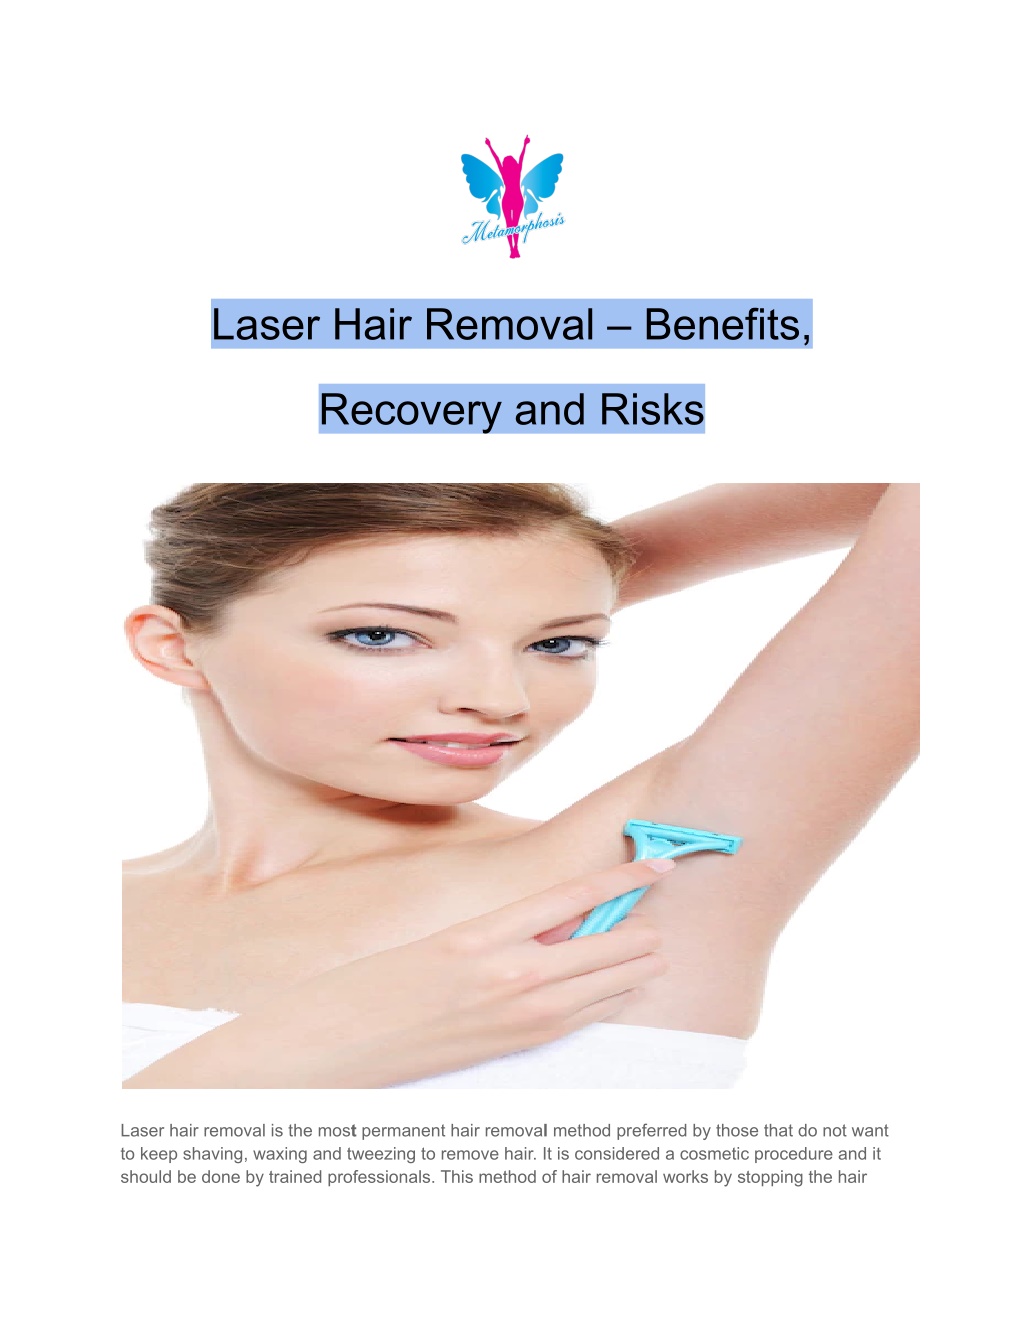 Ppt Laser Hair Removal Benefits Recovery And Risks Powerpoint Presentation Id 11830752